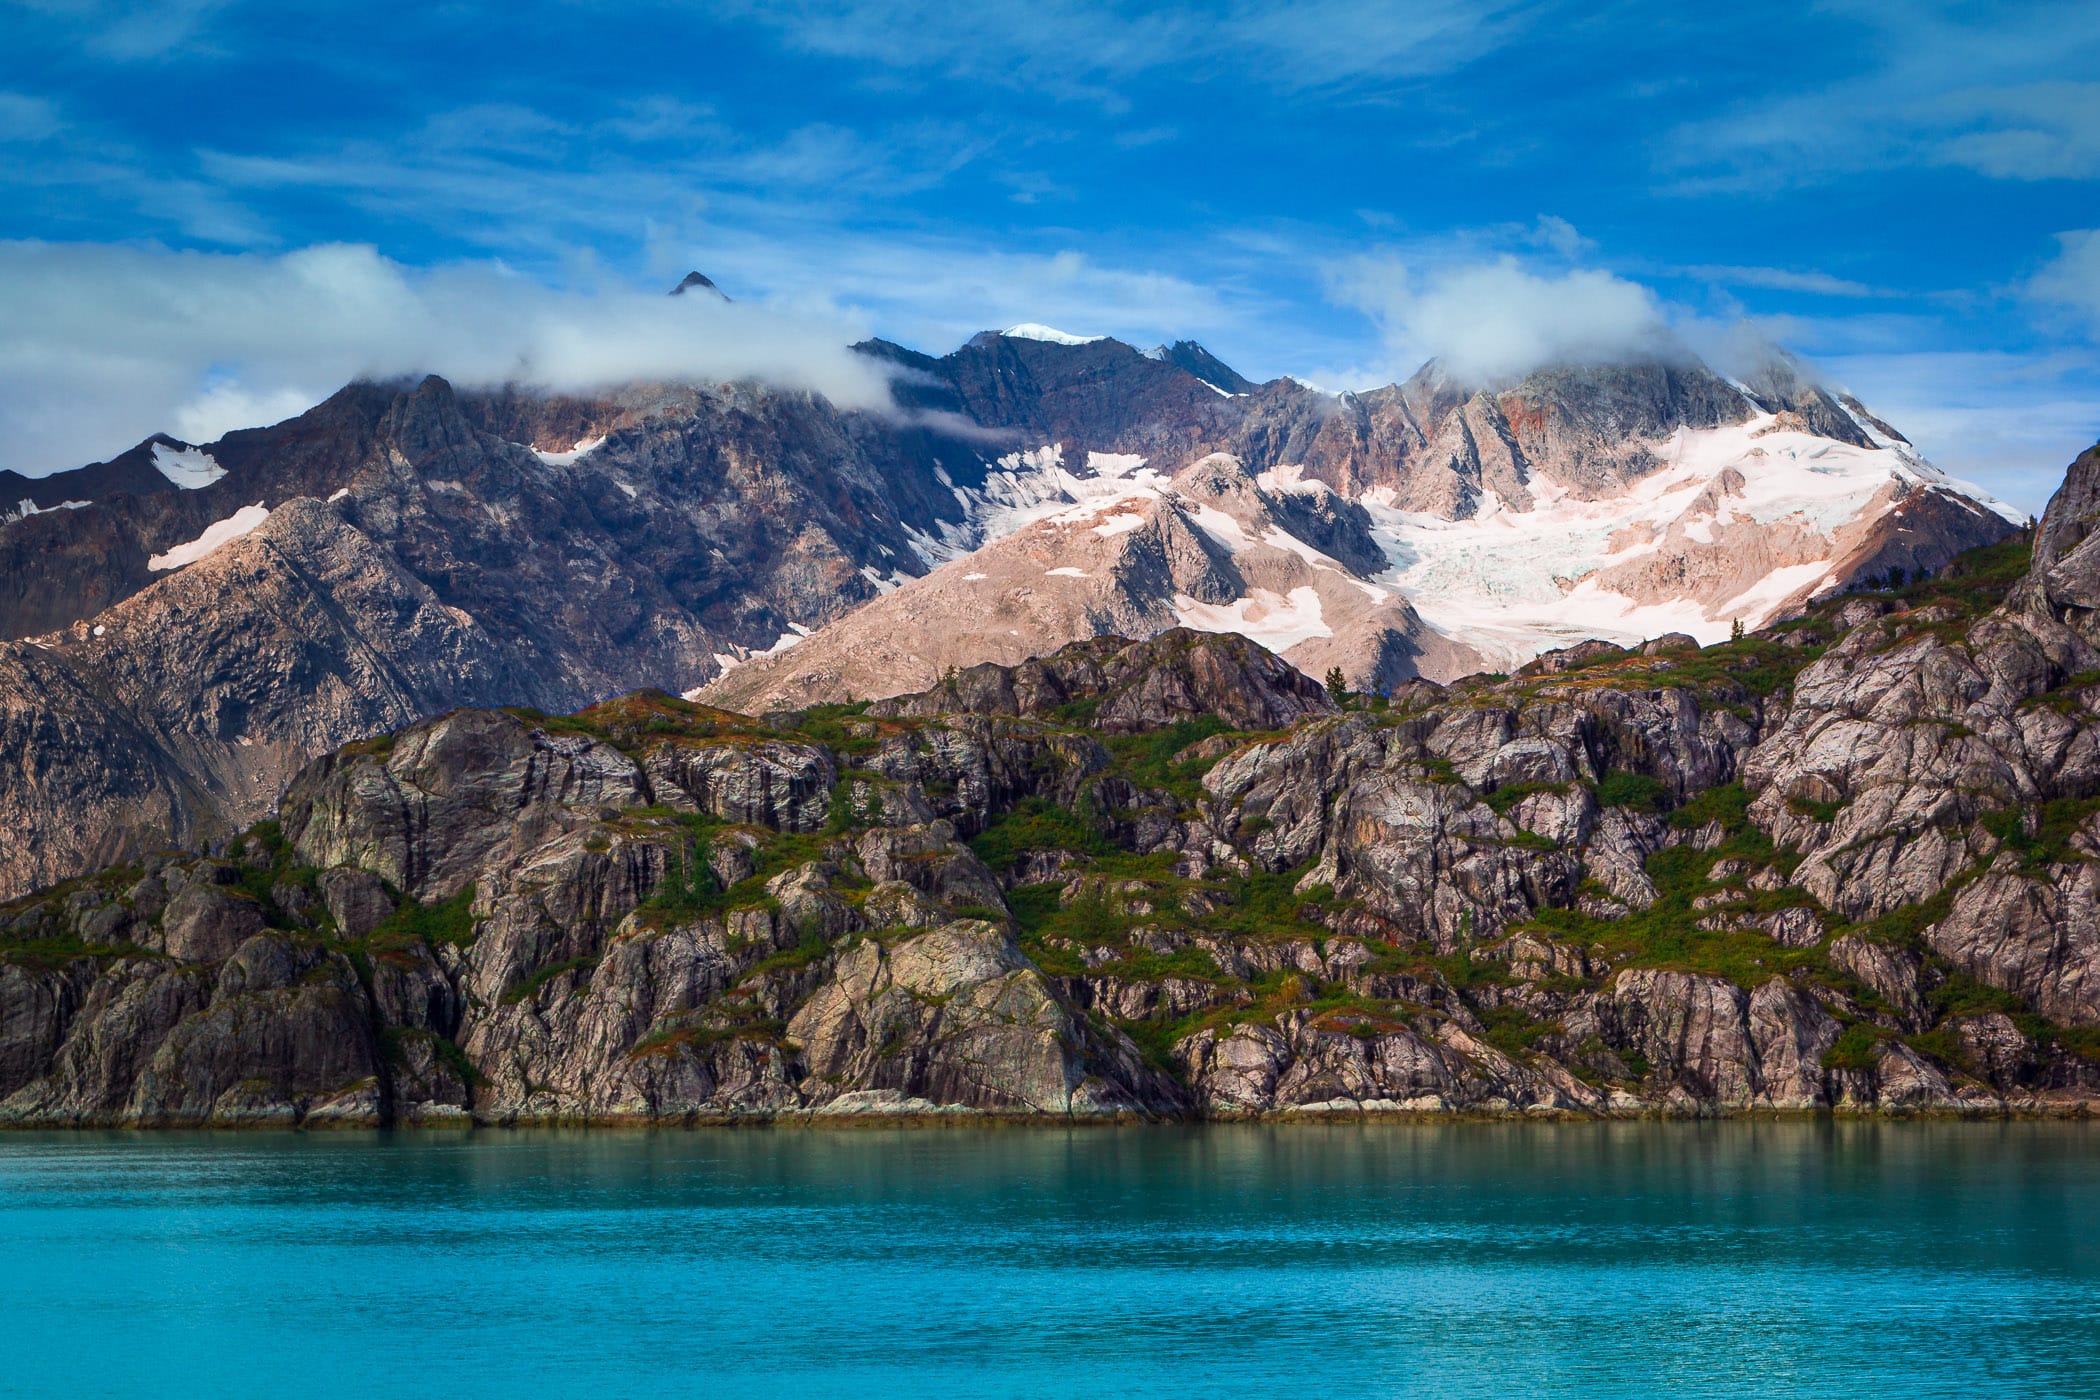 Jagged ice and snow-peaked mountains along the shores of Alaska's Glacier Bay National Park.